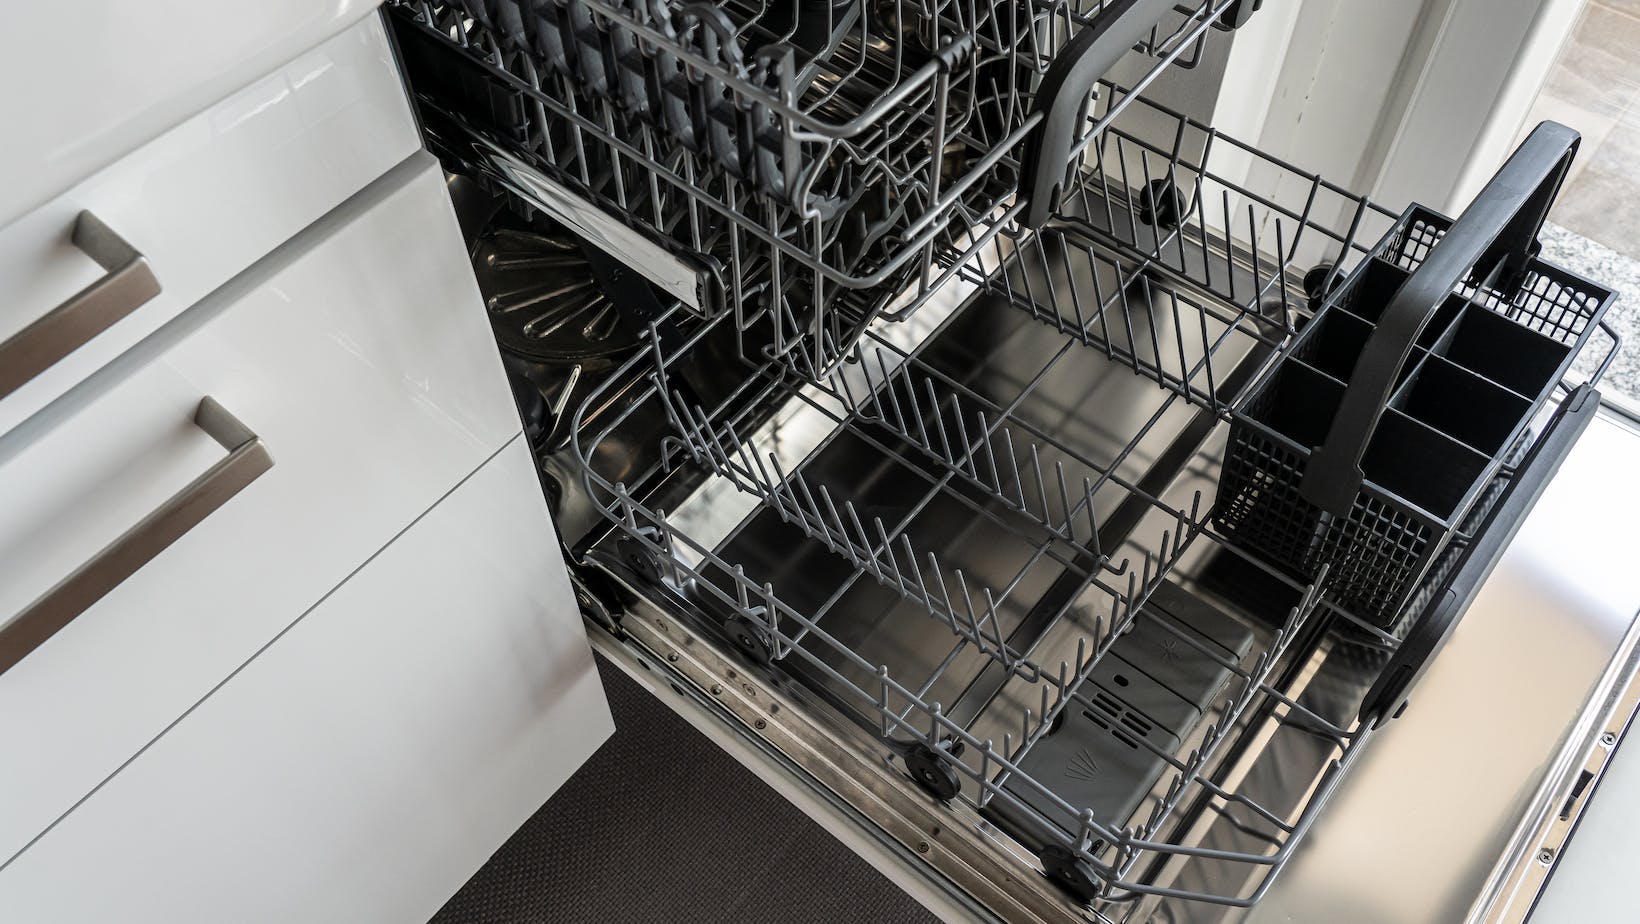 KKDTE404DSS Dishwasher Review: Top Pros and Cons Uncovered